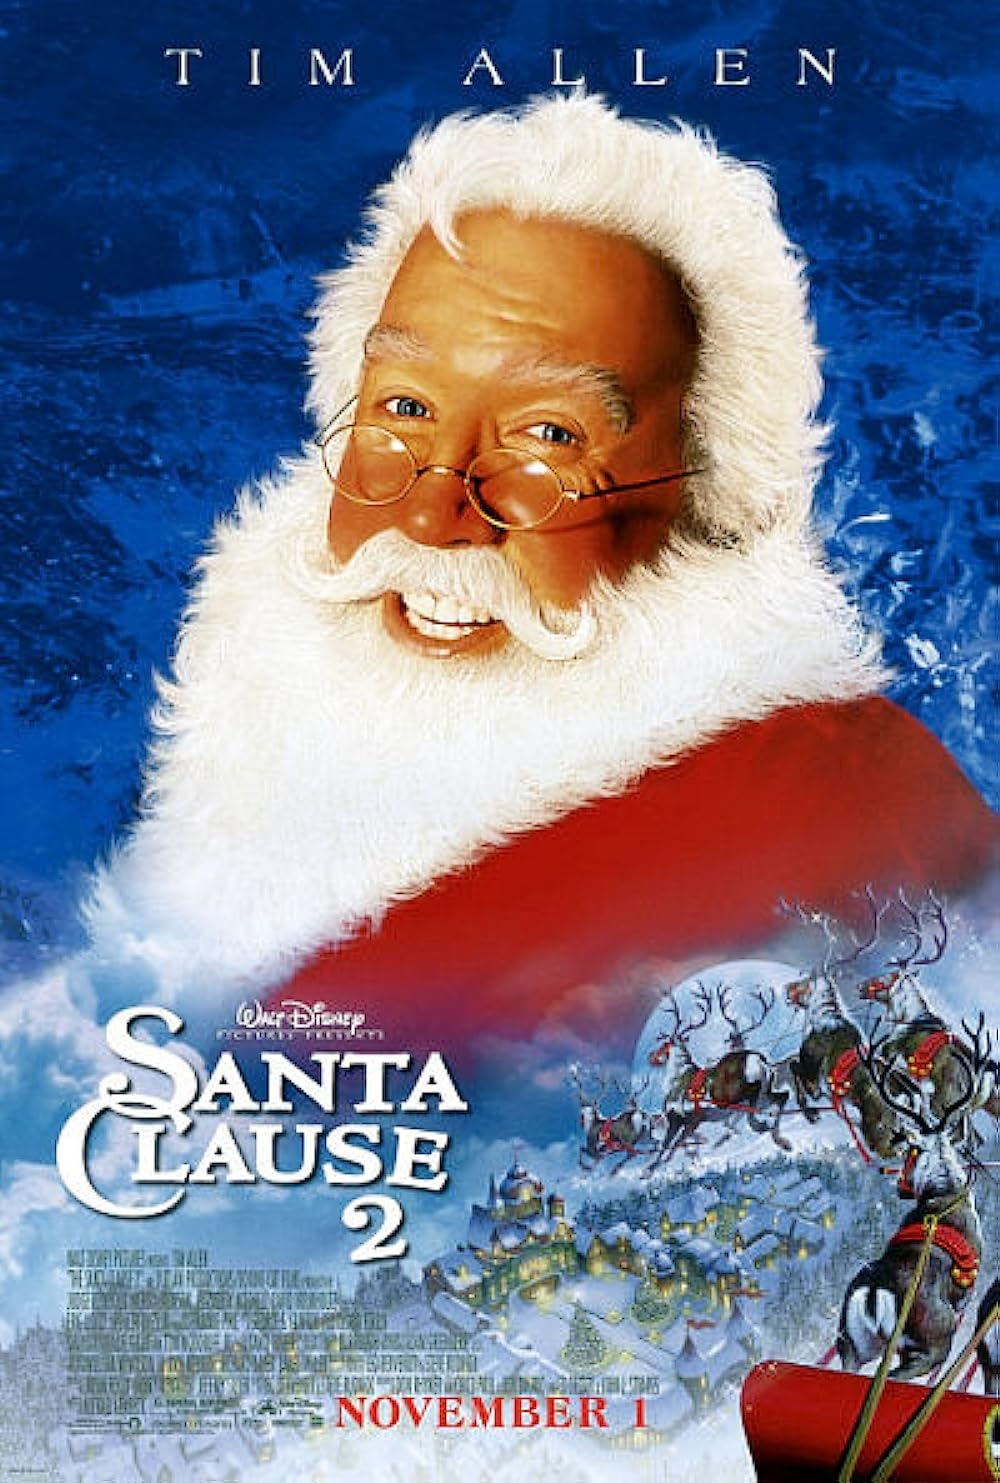 Best Christmas animated movies - The Santa Clause 2